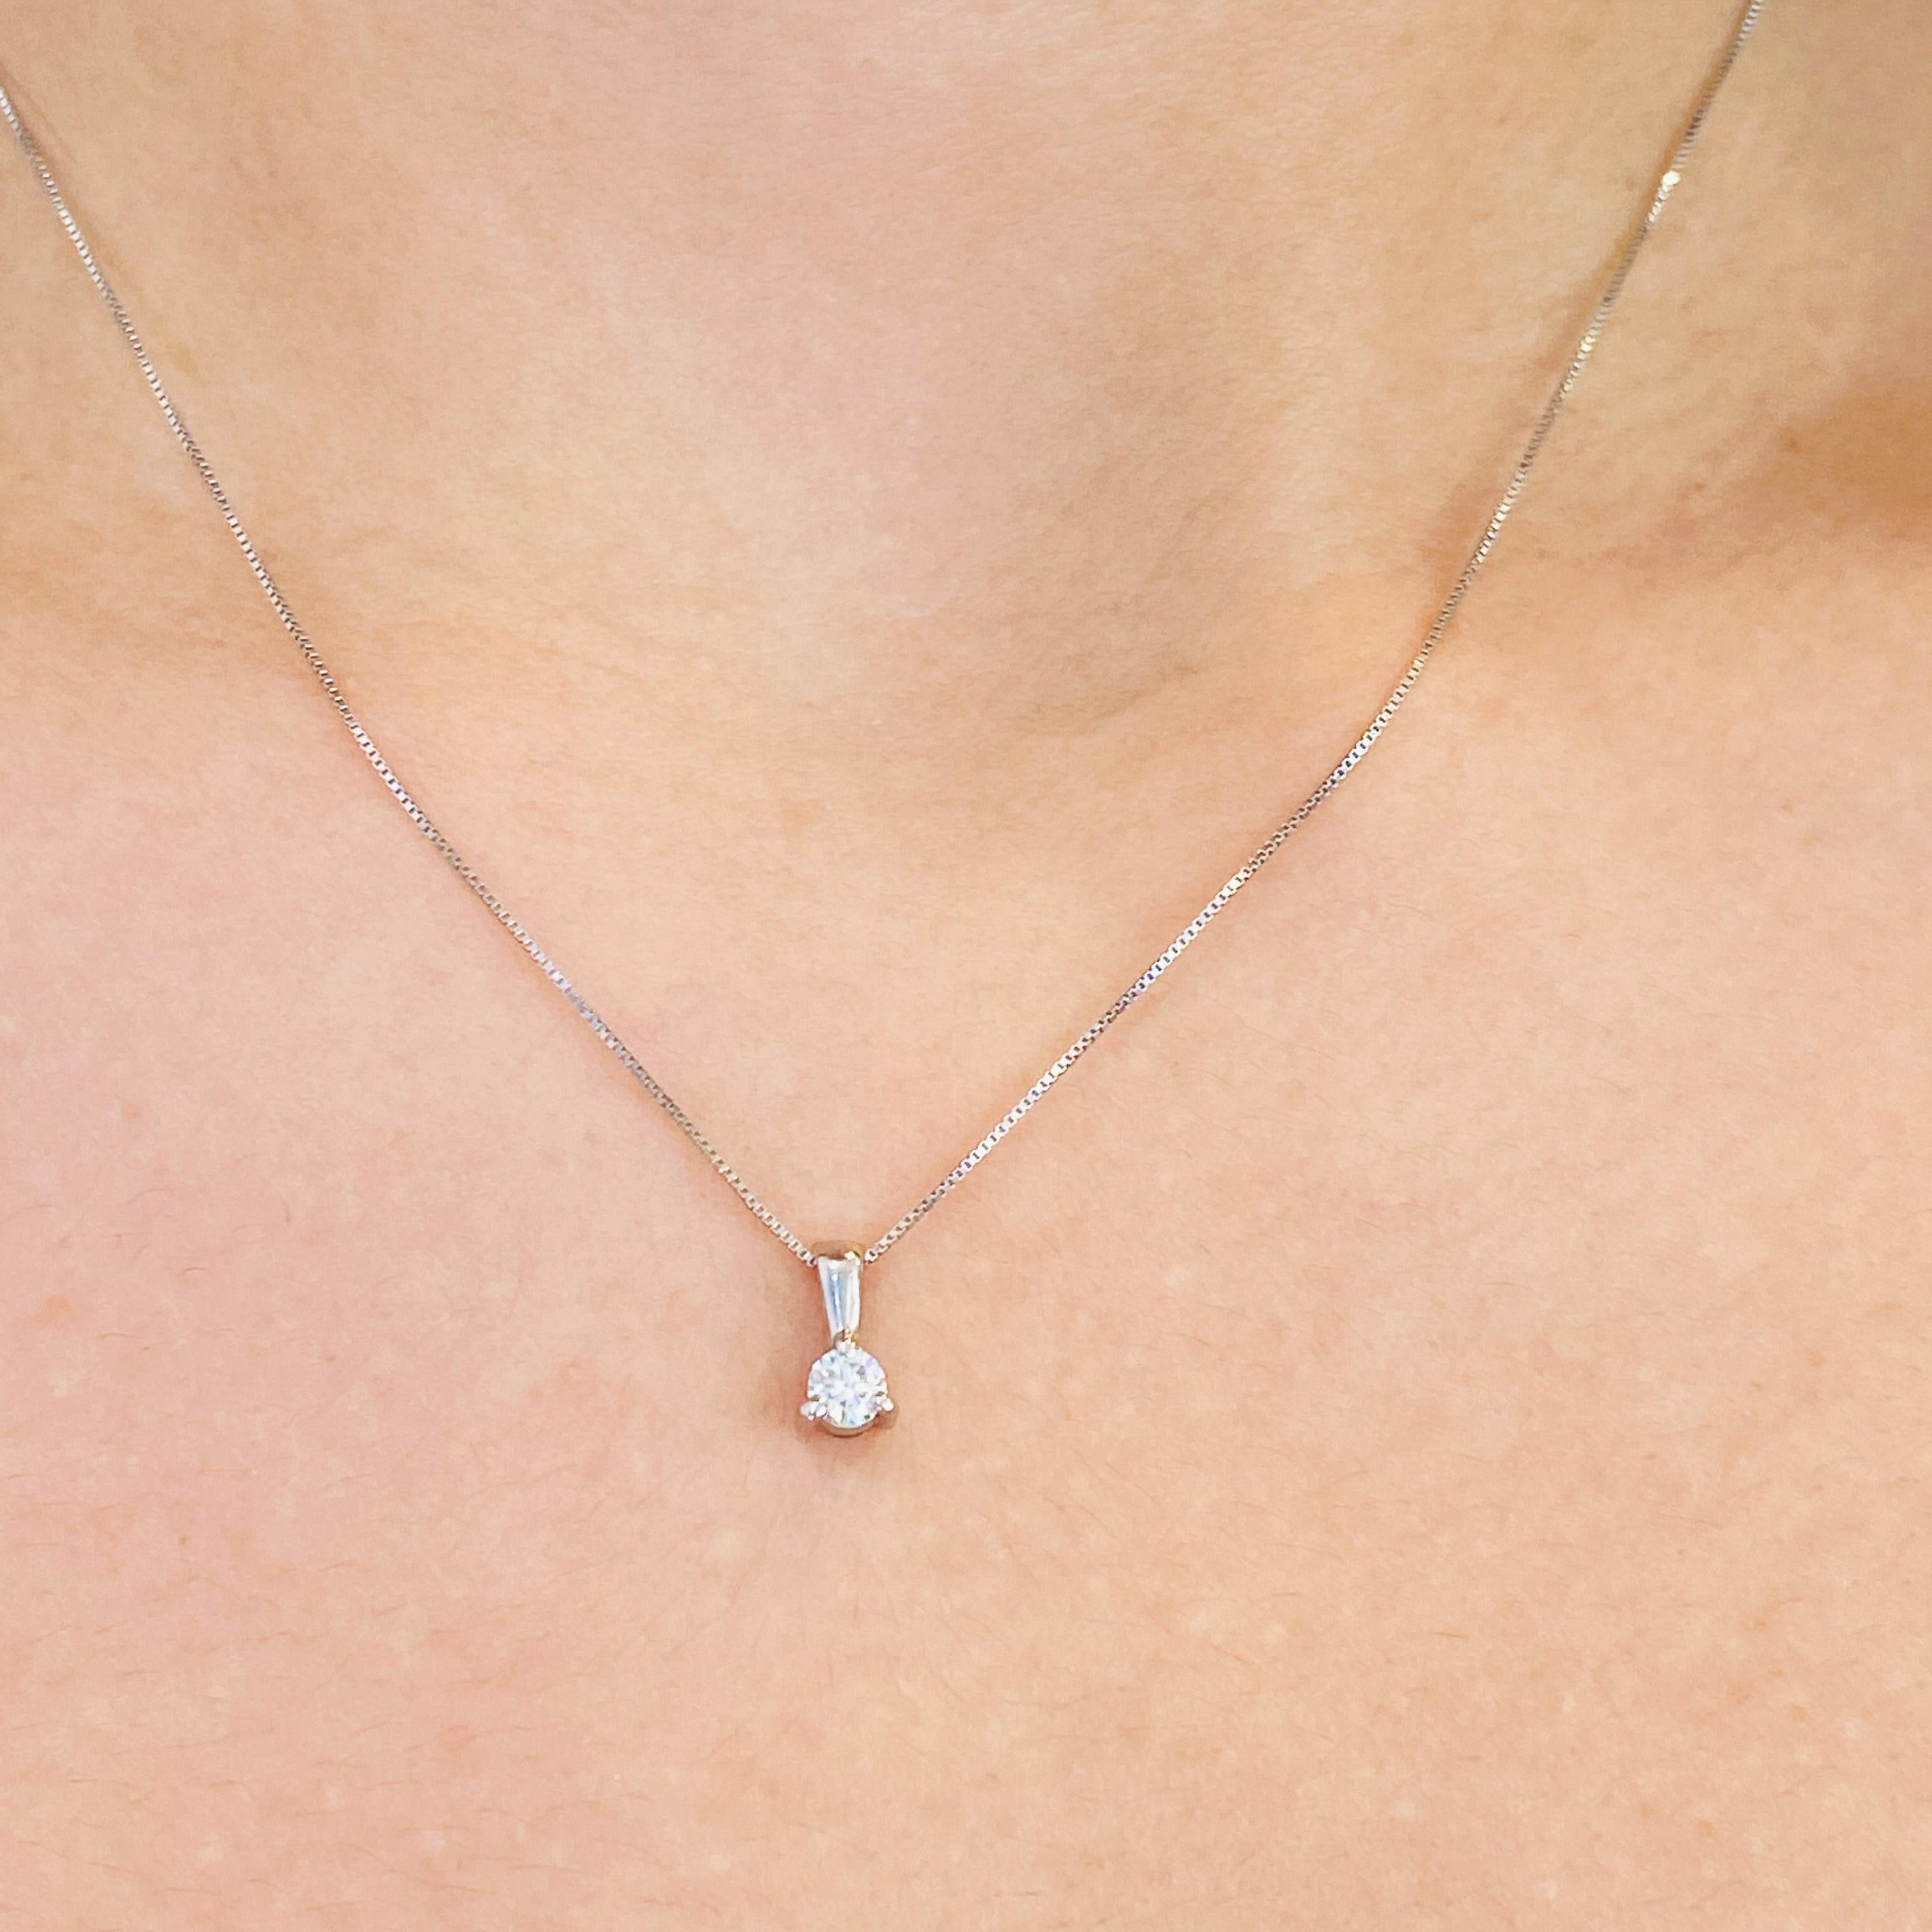 Grace the neck of your loved one with this beautiful .20 carat diamond necklace in 18 karat white gold! This beautiful 1/5 carat diamond pendant will flatter your favorite person! The gorgeous G color diamond sparkles brightly in its gracefully